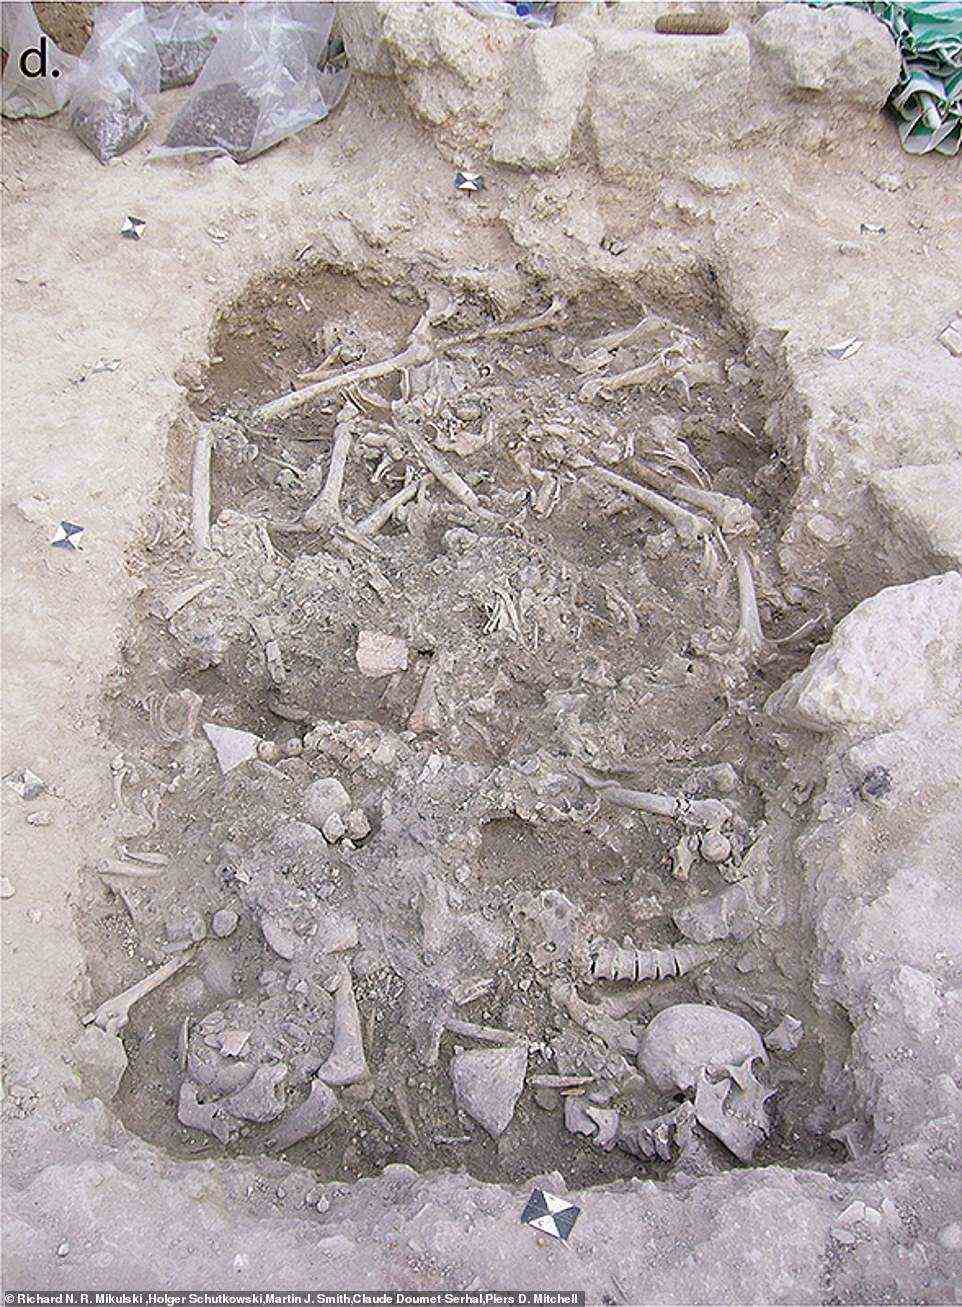 And the most gruesome discovery to make the list is a two mass graves containing 25 Crusaders who were slaughtered during a 13th-century war in the Holy Land have been unearthed in Lebanon